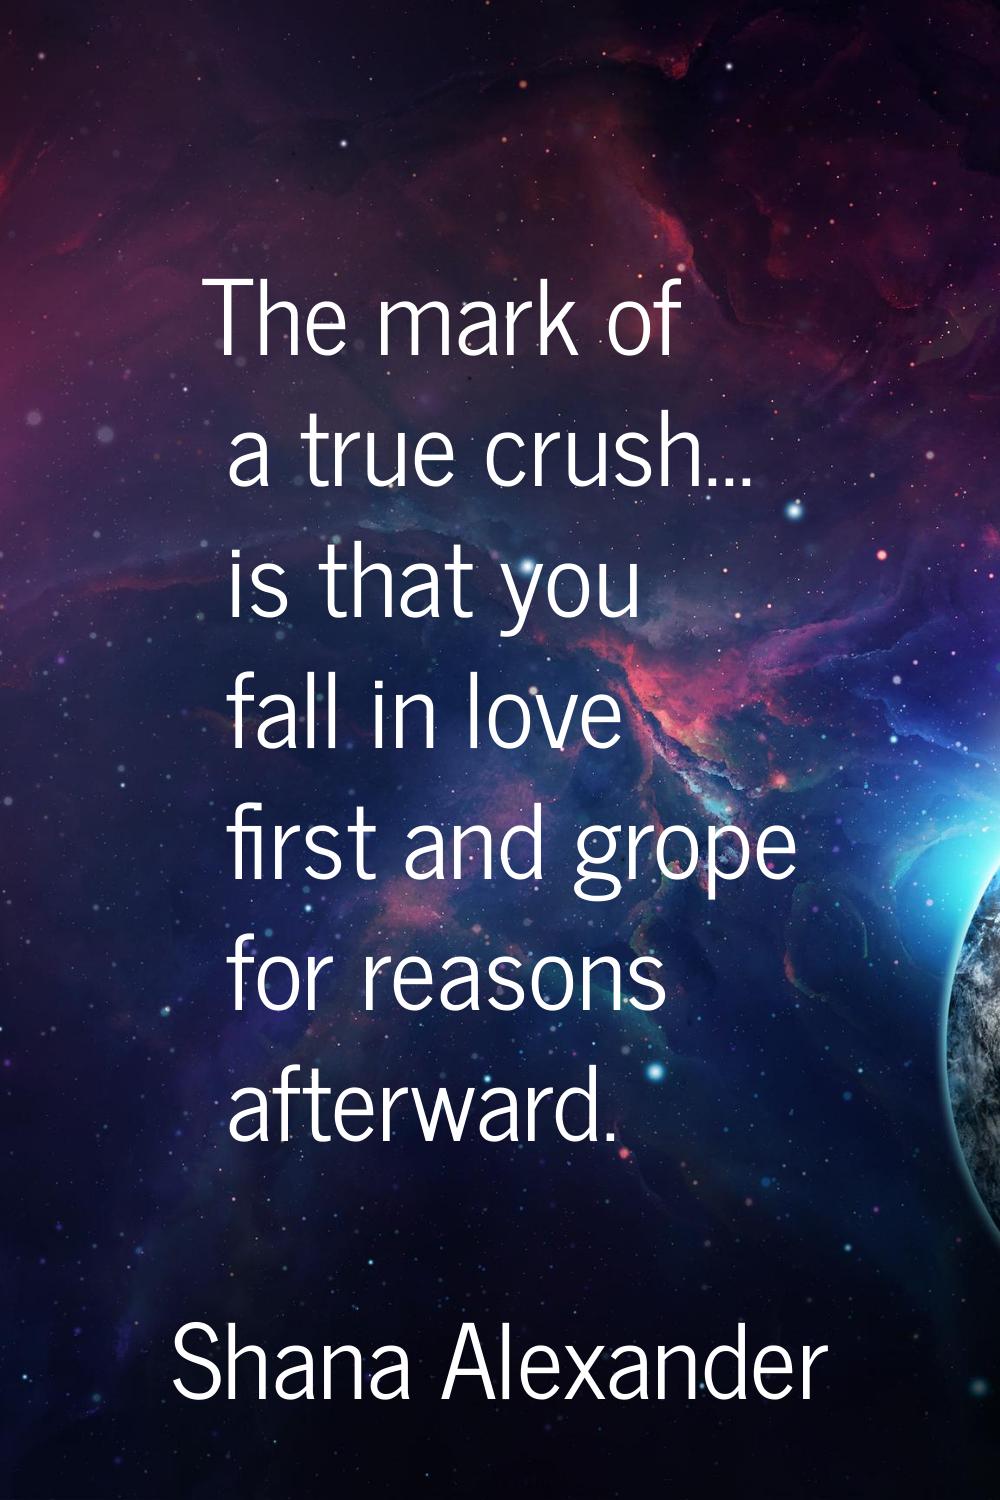 The mark of a true crush... is that you fall in love first and grope for reasons afterward.